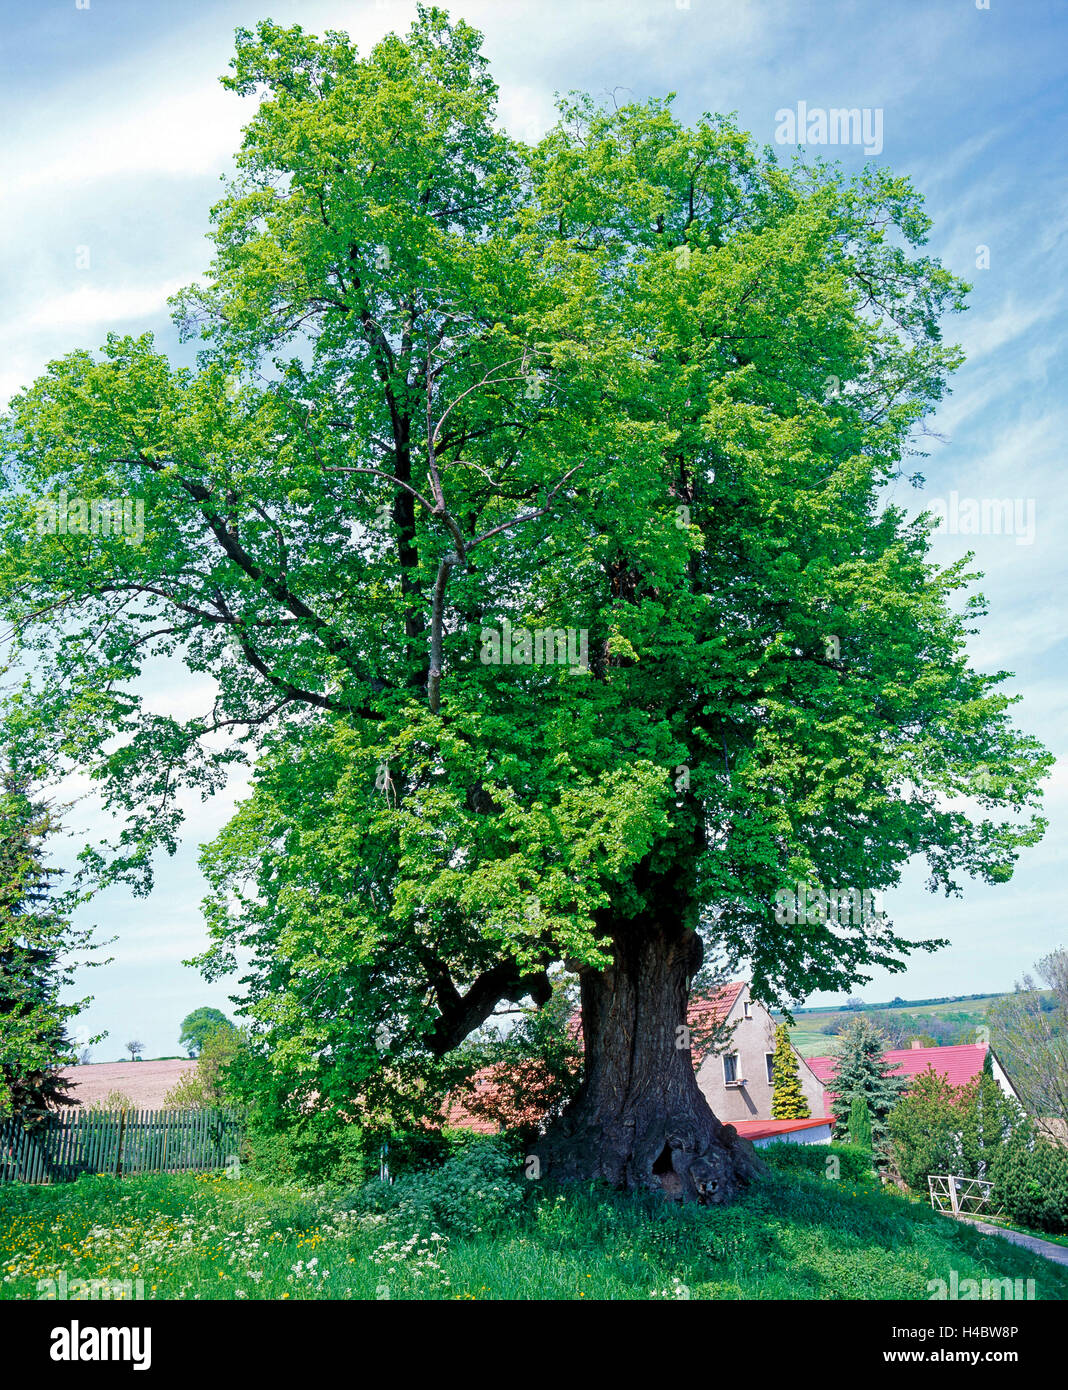 impressive Small-leaved Lime in Kautzsch near Meissen, Tilia cordata, 600 years old, today as a natural monument under protection, was planted around 1450. Stock Photo